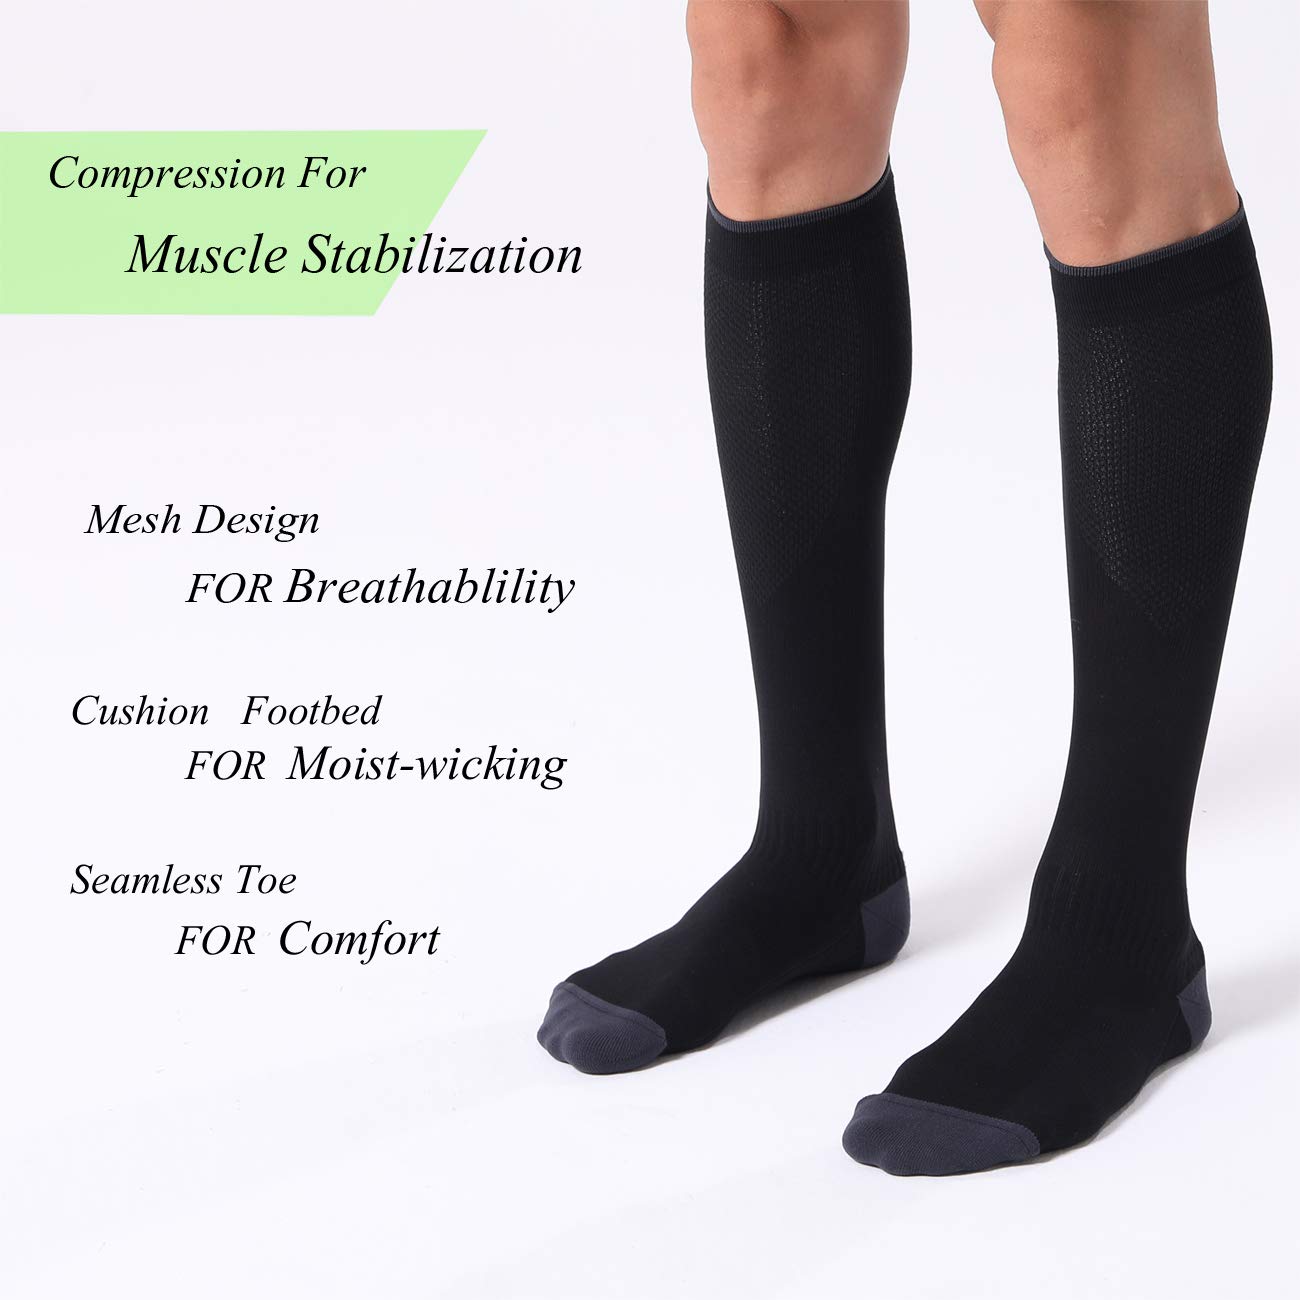 FITRELL 3 Pairs Compression Socks for Women and Men 20-30mmHg- Circulation and Muscle Support Socks for Travel, Running, Nurse, Medical, BLACK S/M